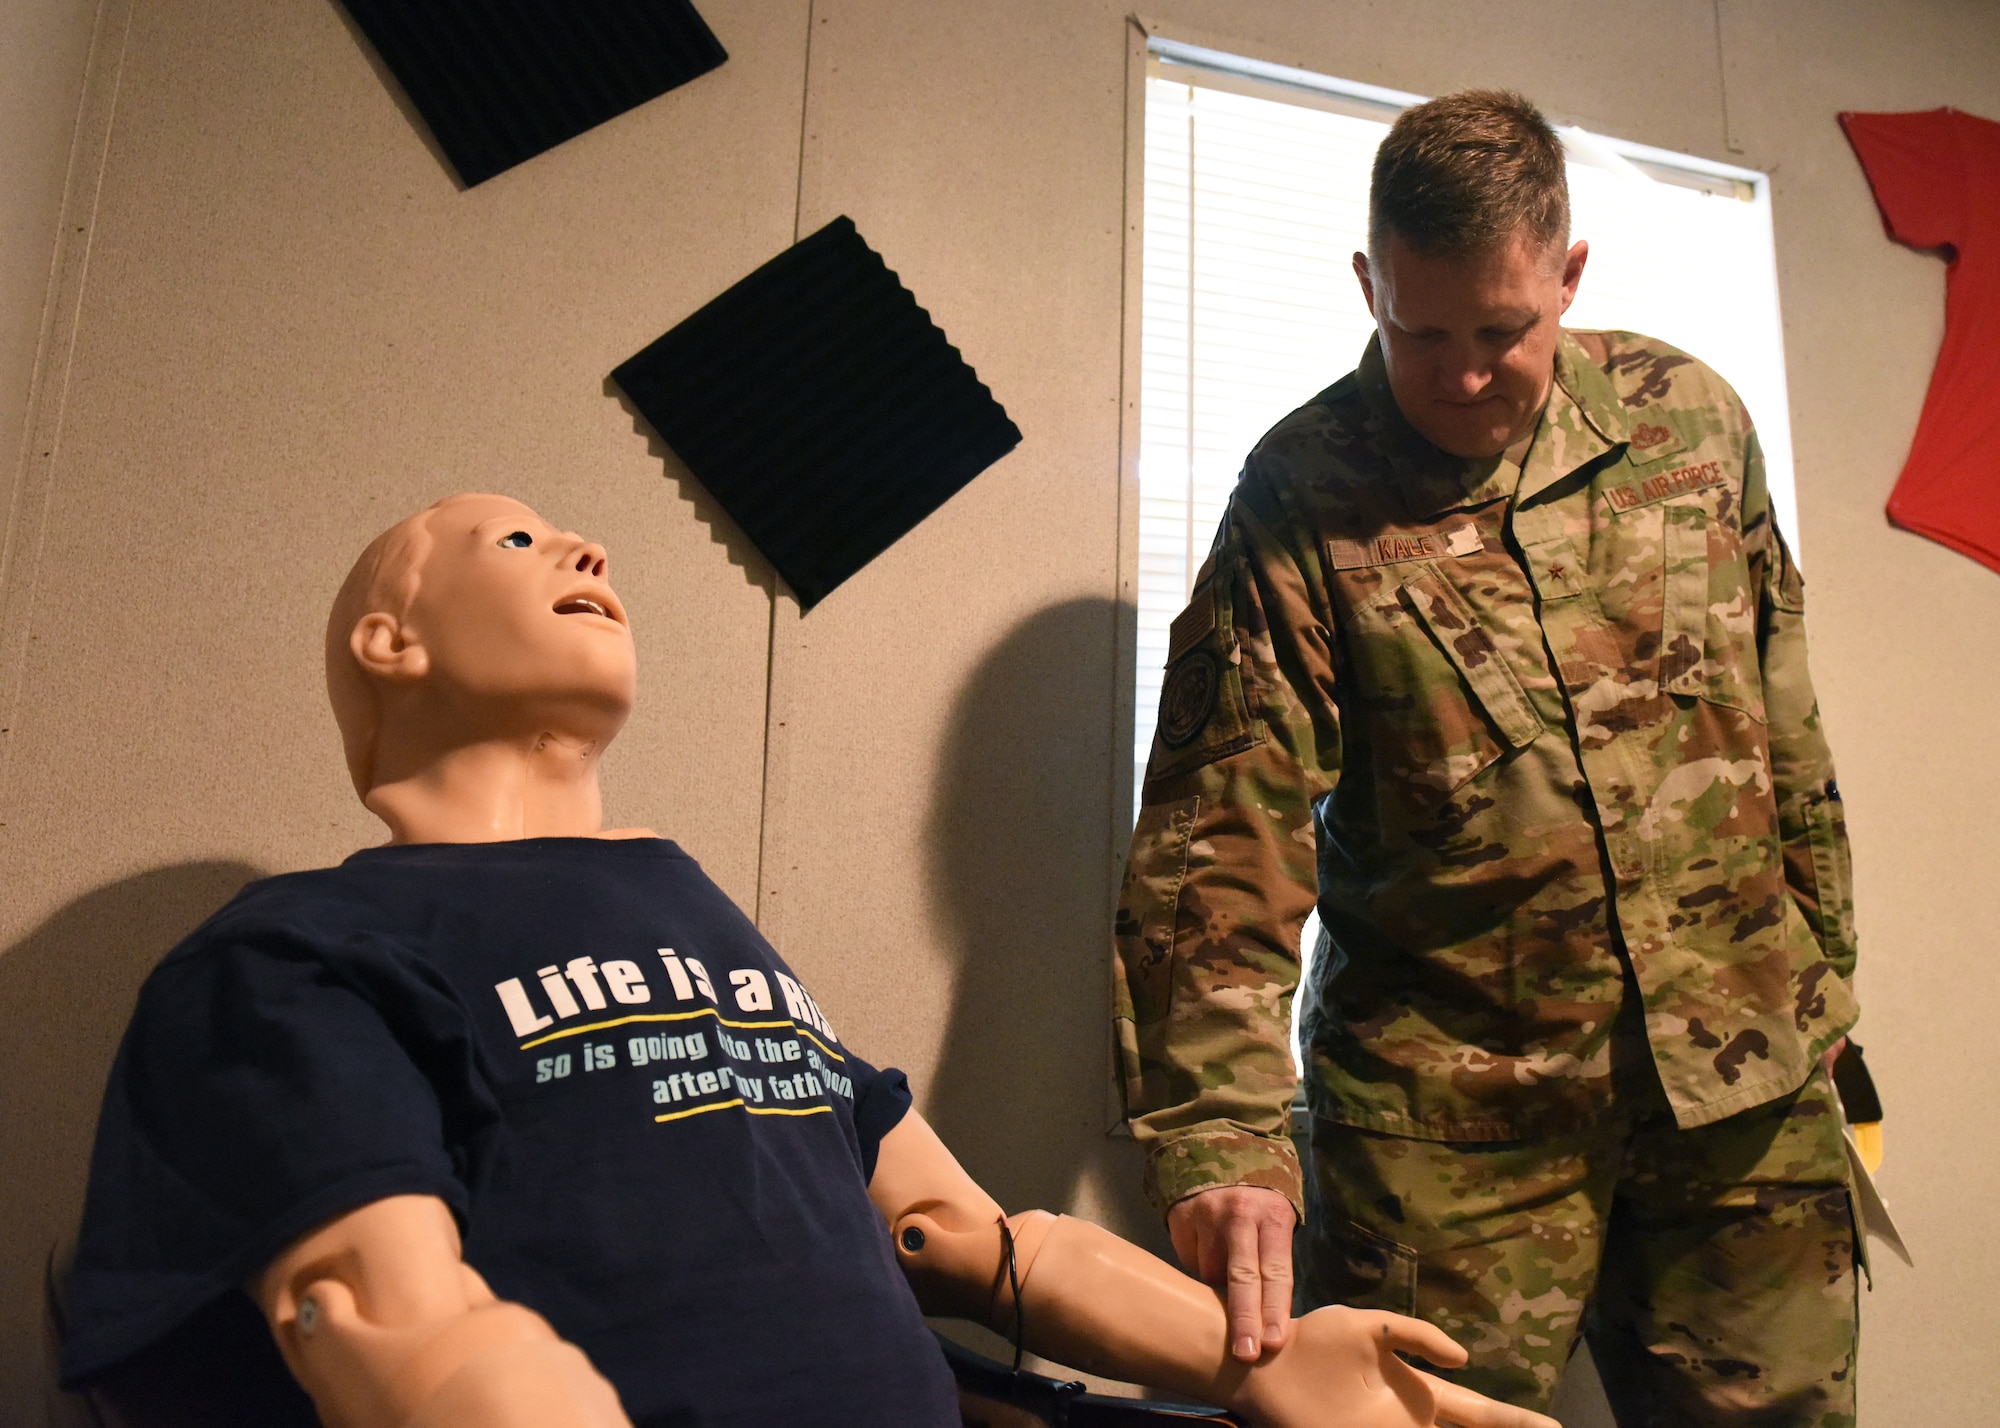 U.S. Air Force Brig. Gen. William Kale III, Air Force Director of Civil Engineers, checks the pulse on a HAL Manikin at Goodfellow Air Force Base, Texas, June 23, 2022. The simulator can display a pulse, dilate pupils and use blue lights in the face to represent cyanotic conditions. (U.S. Air Force photo by Airman 1st Class Zachary Heimbuch)